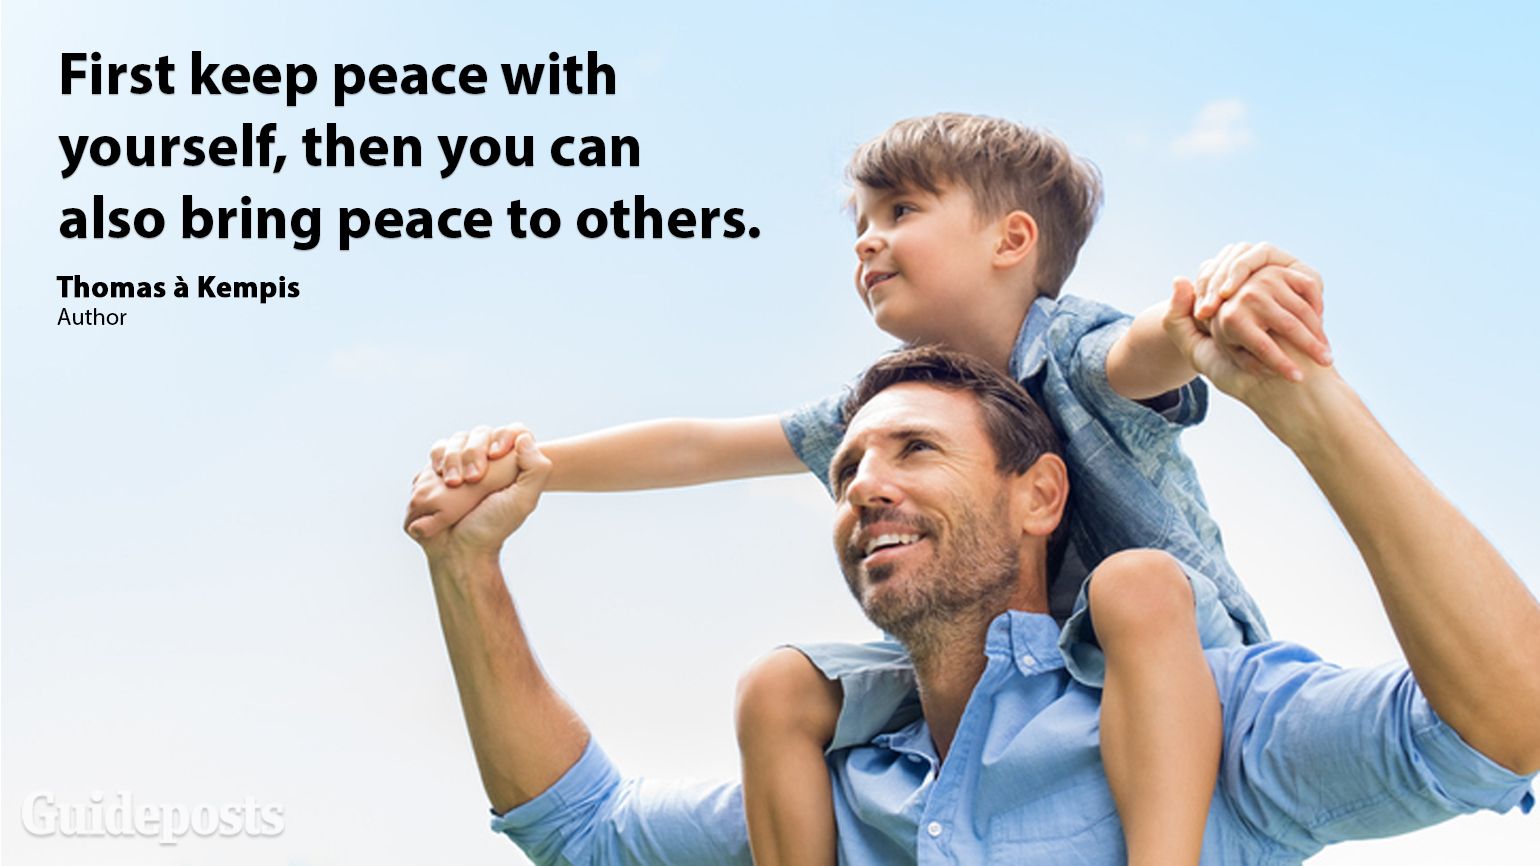 First keep peace with yourself, then you can also bring peace to others